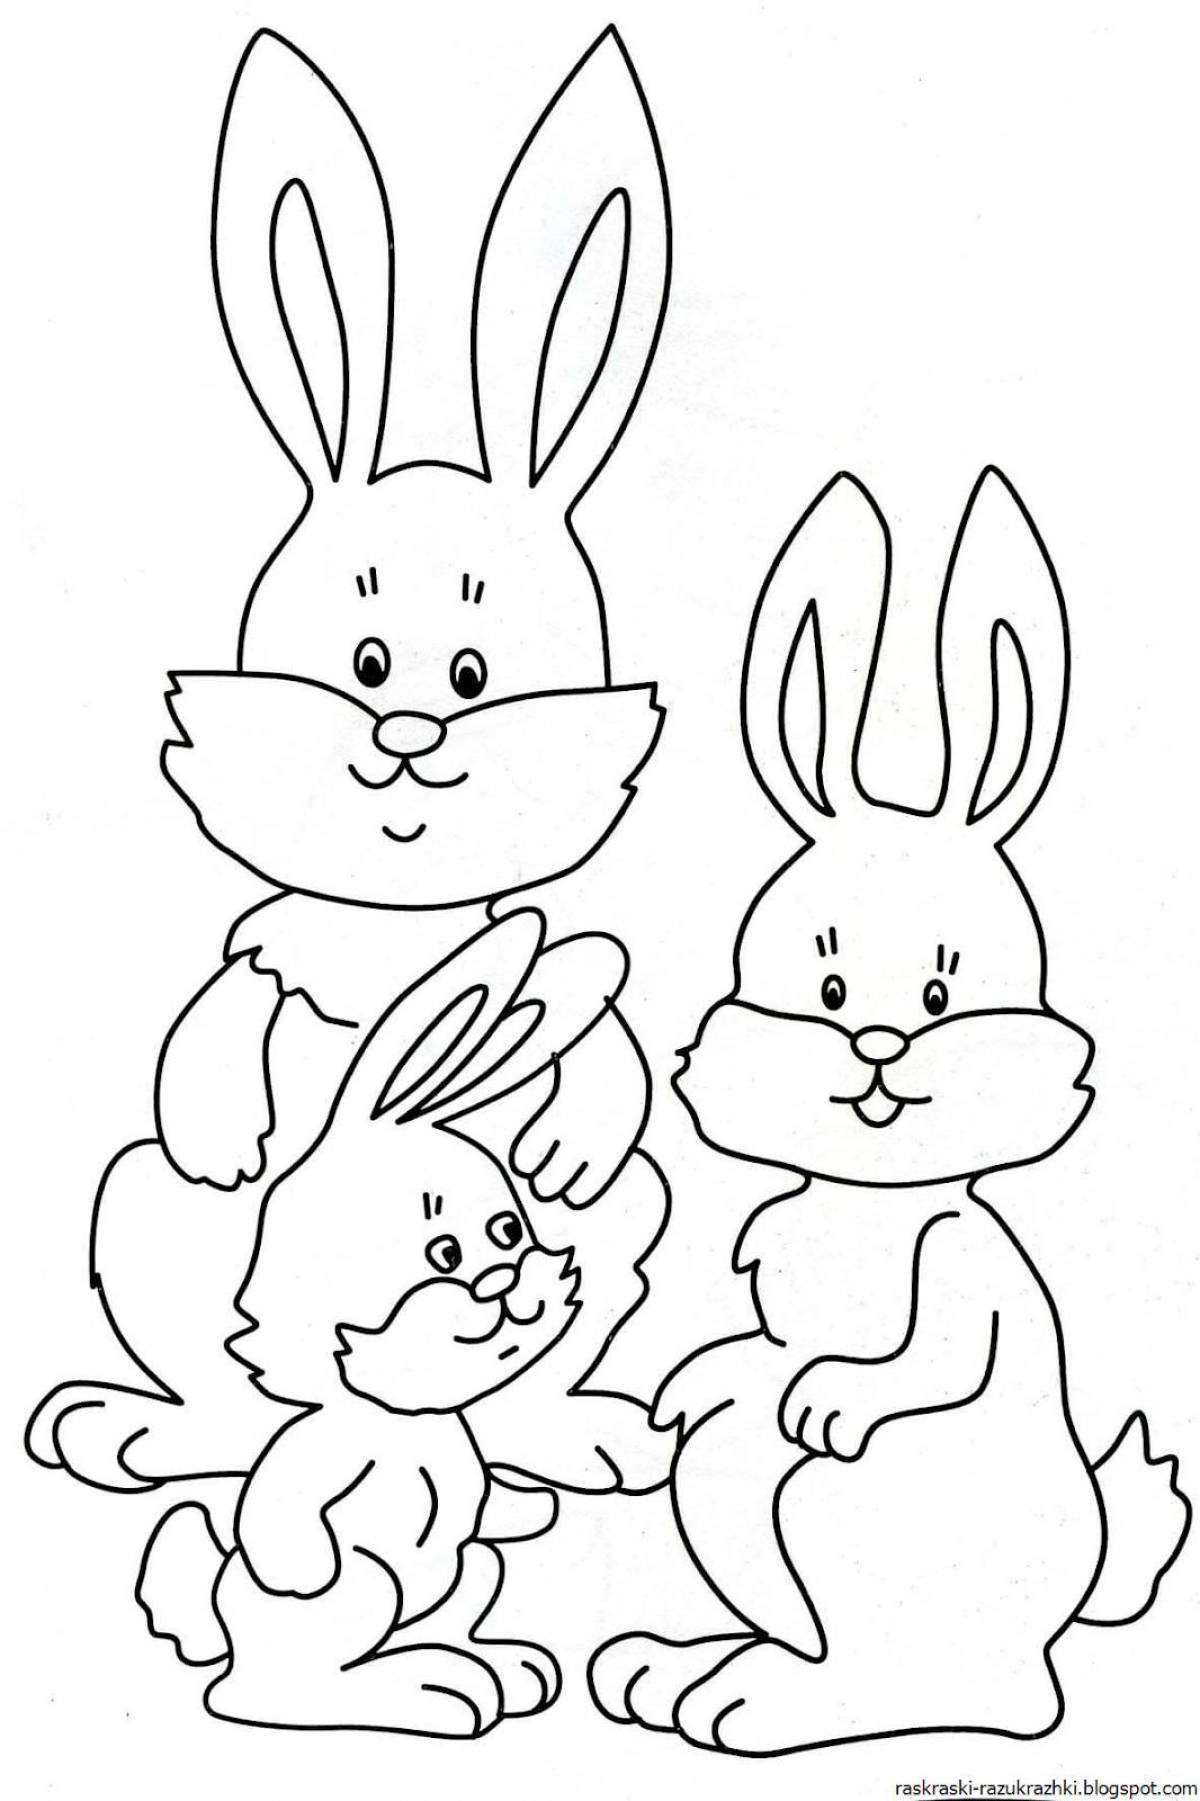 Dazzling hare coloring picture